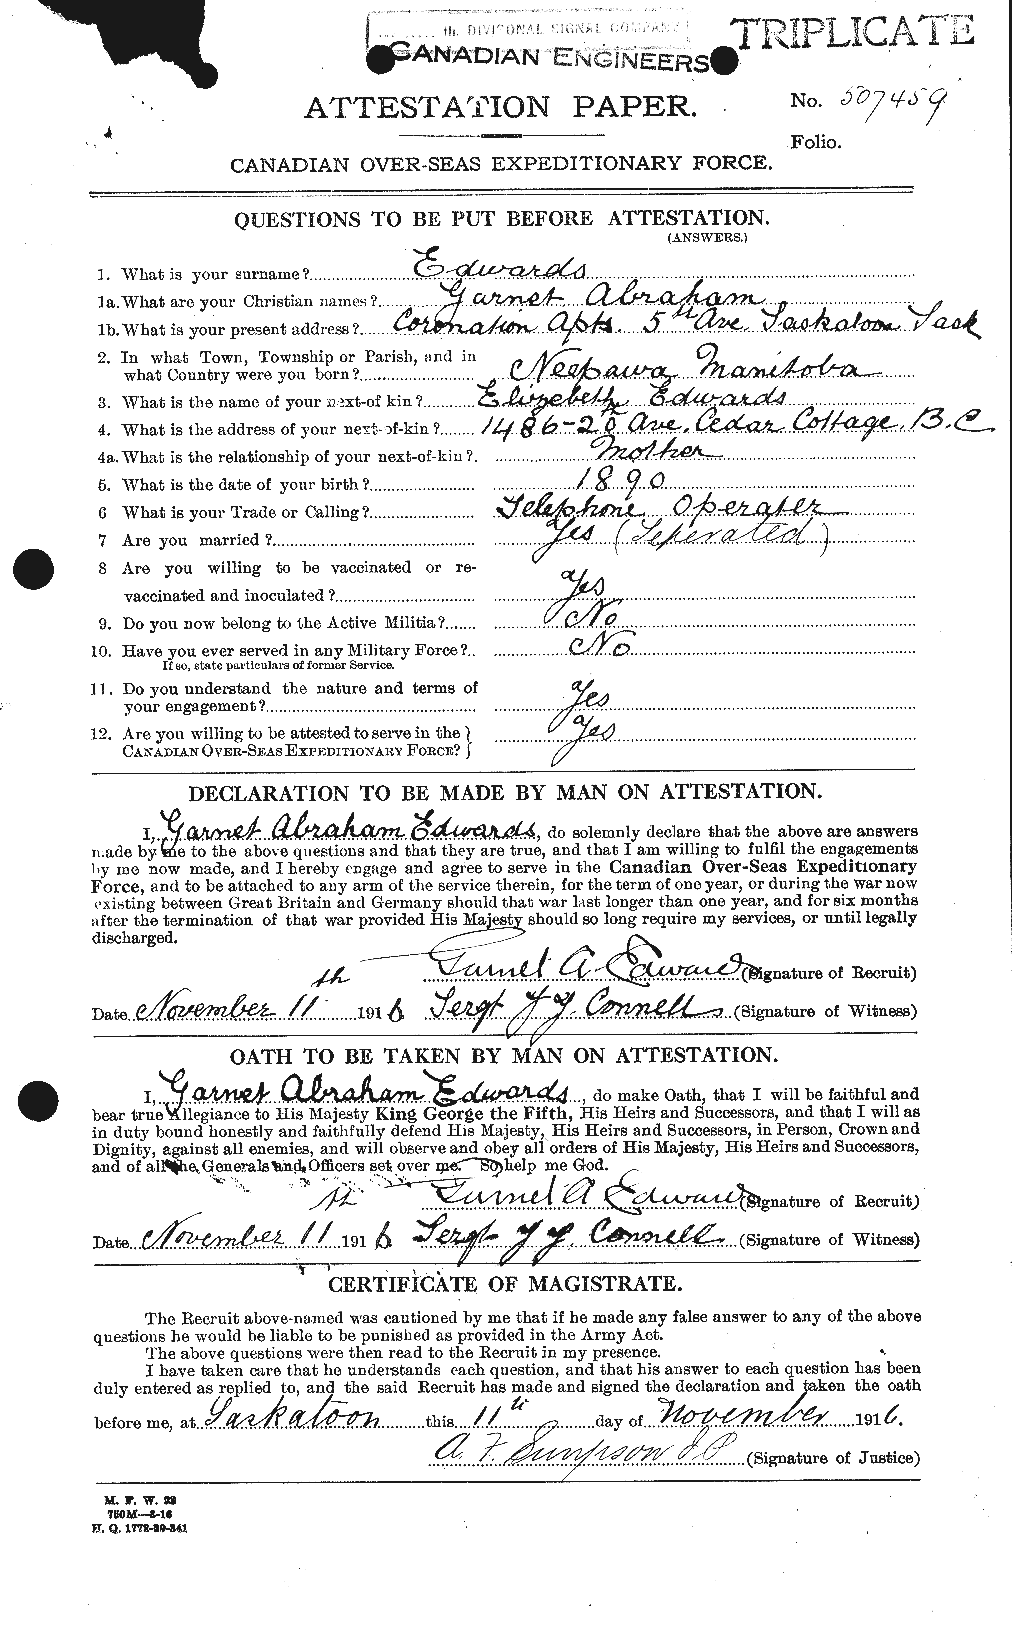 Personnel Records of the First World War - CEF 309088a